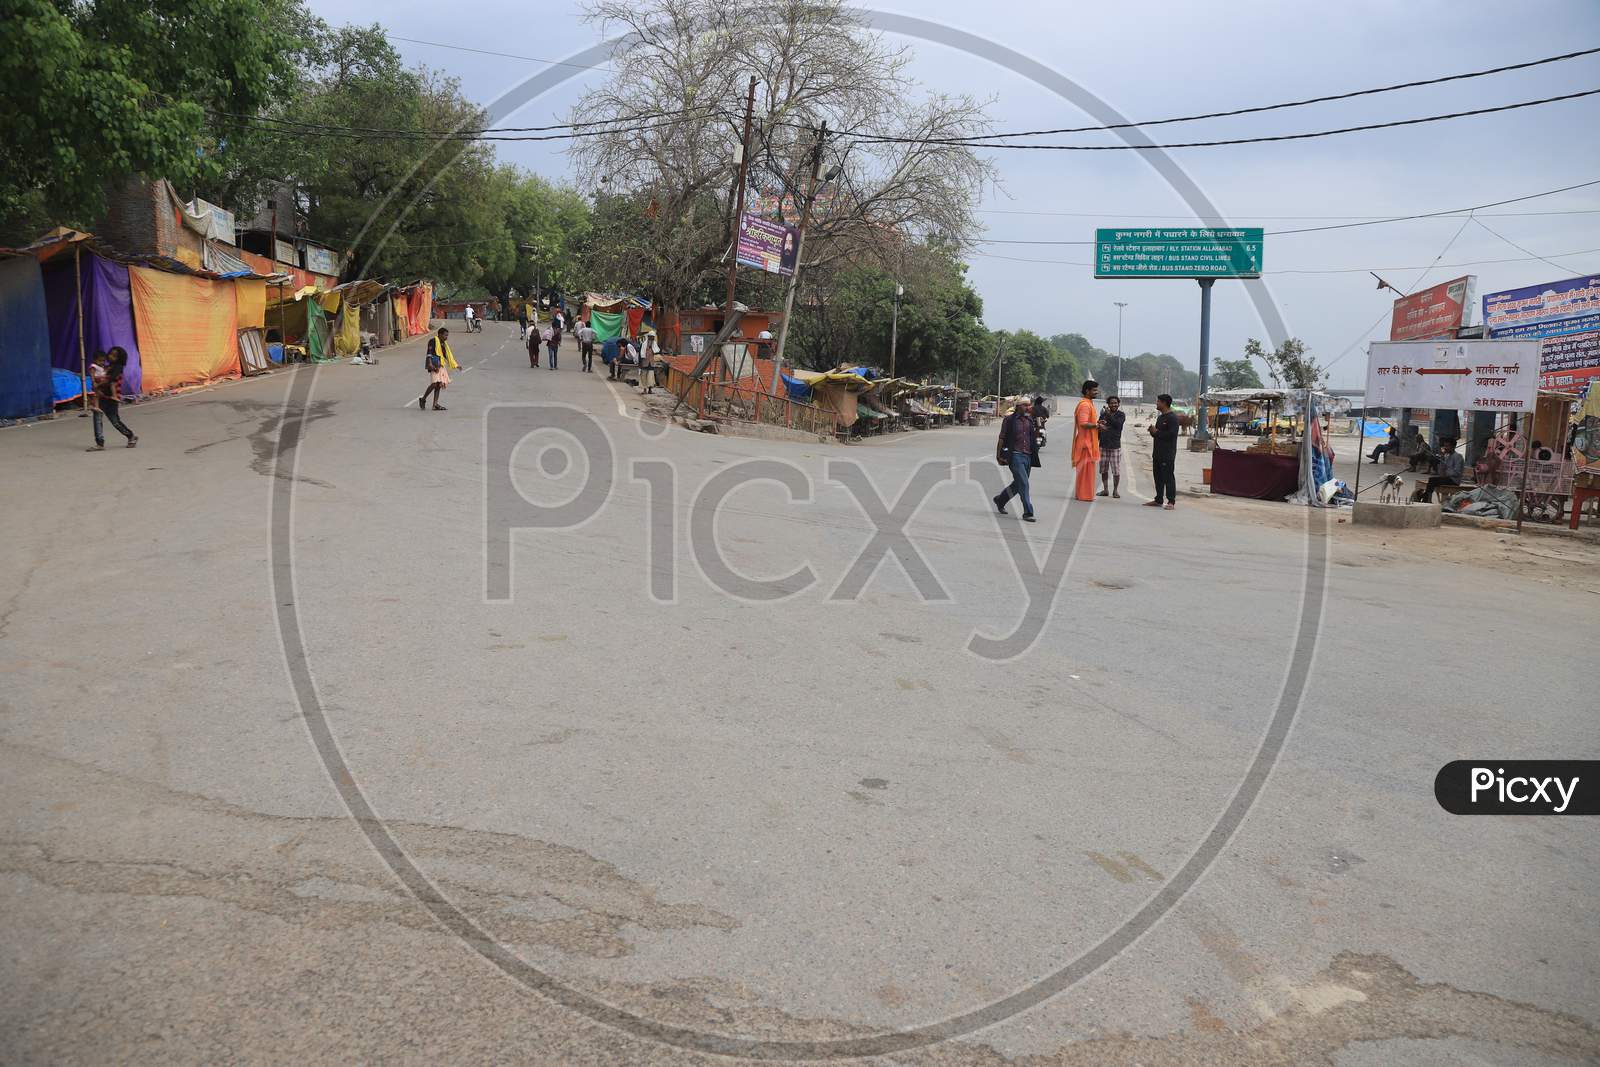 Lord Bade Hanuman Temple Closed On The Occasion of Hanuman Jayanti Festival? During A 21-Day Nationwide Lockdown To Slow The Spreading Of Coronavirus Disease (Covid-19) In Prayagraj, April 8, 2020.